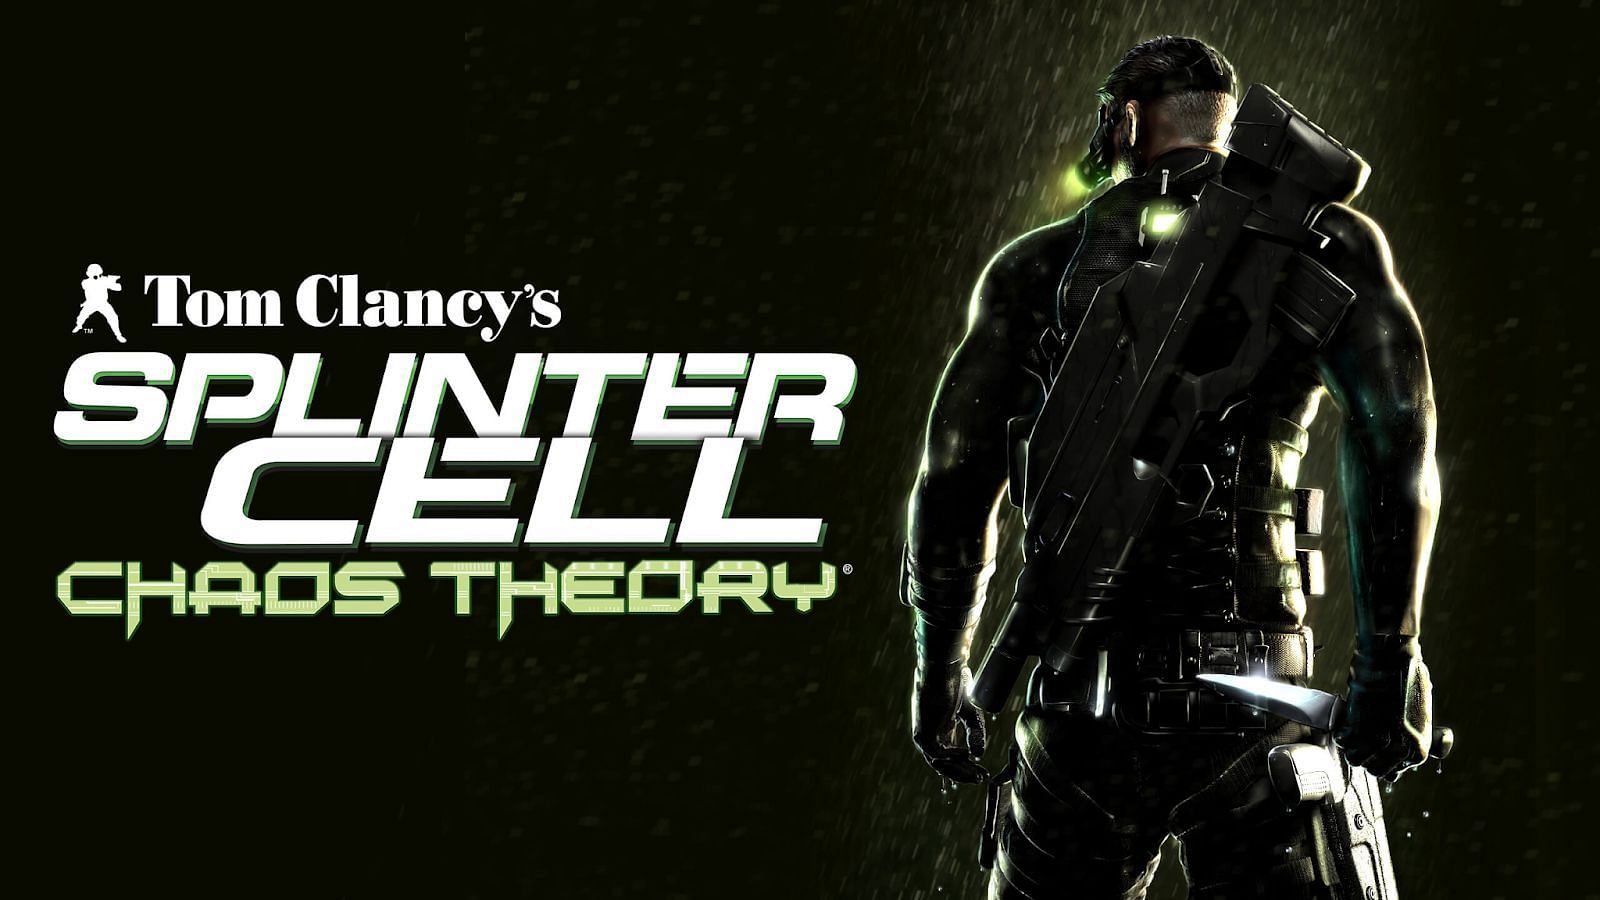 Tom Clancy&rsquo;s Splinter Cell Chaos Theory (Image via Ubisoft)